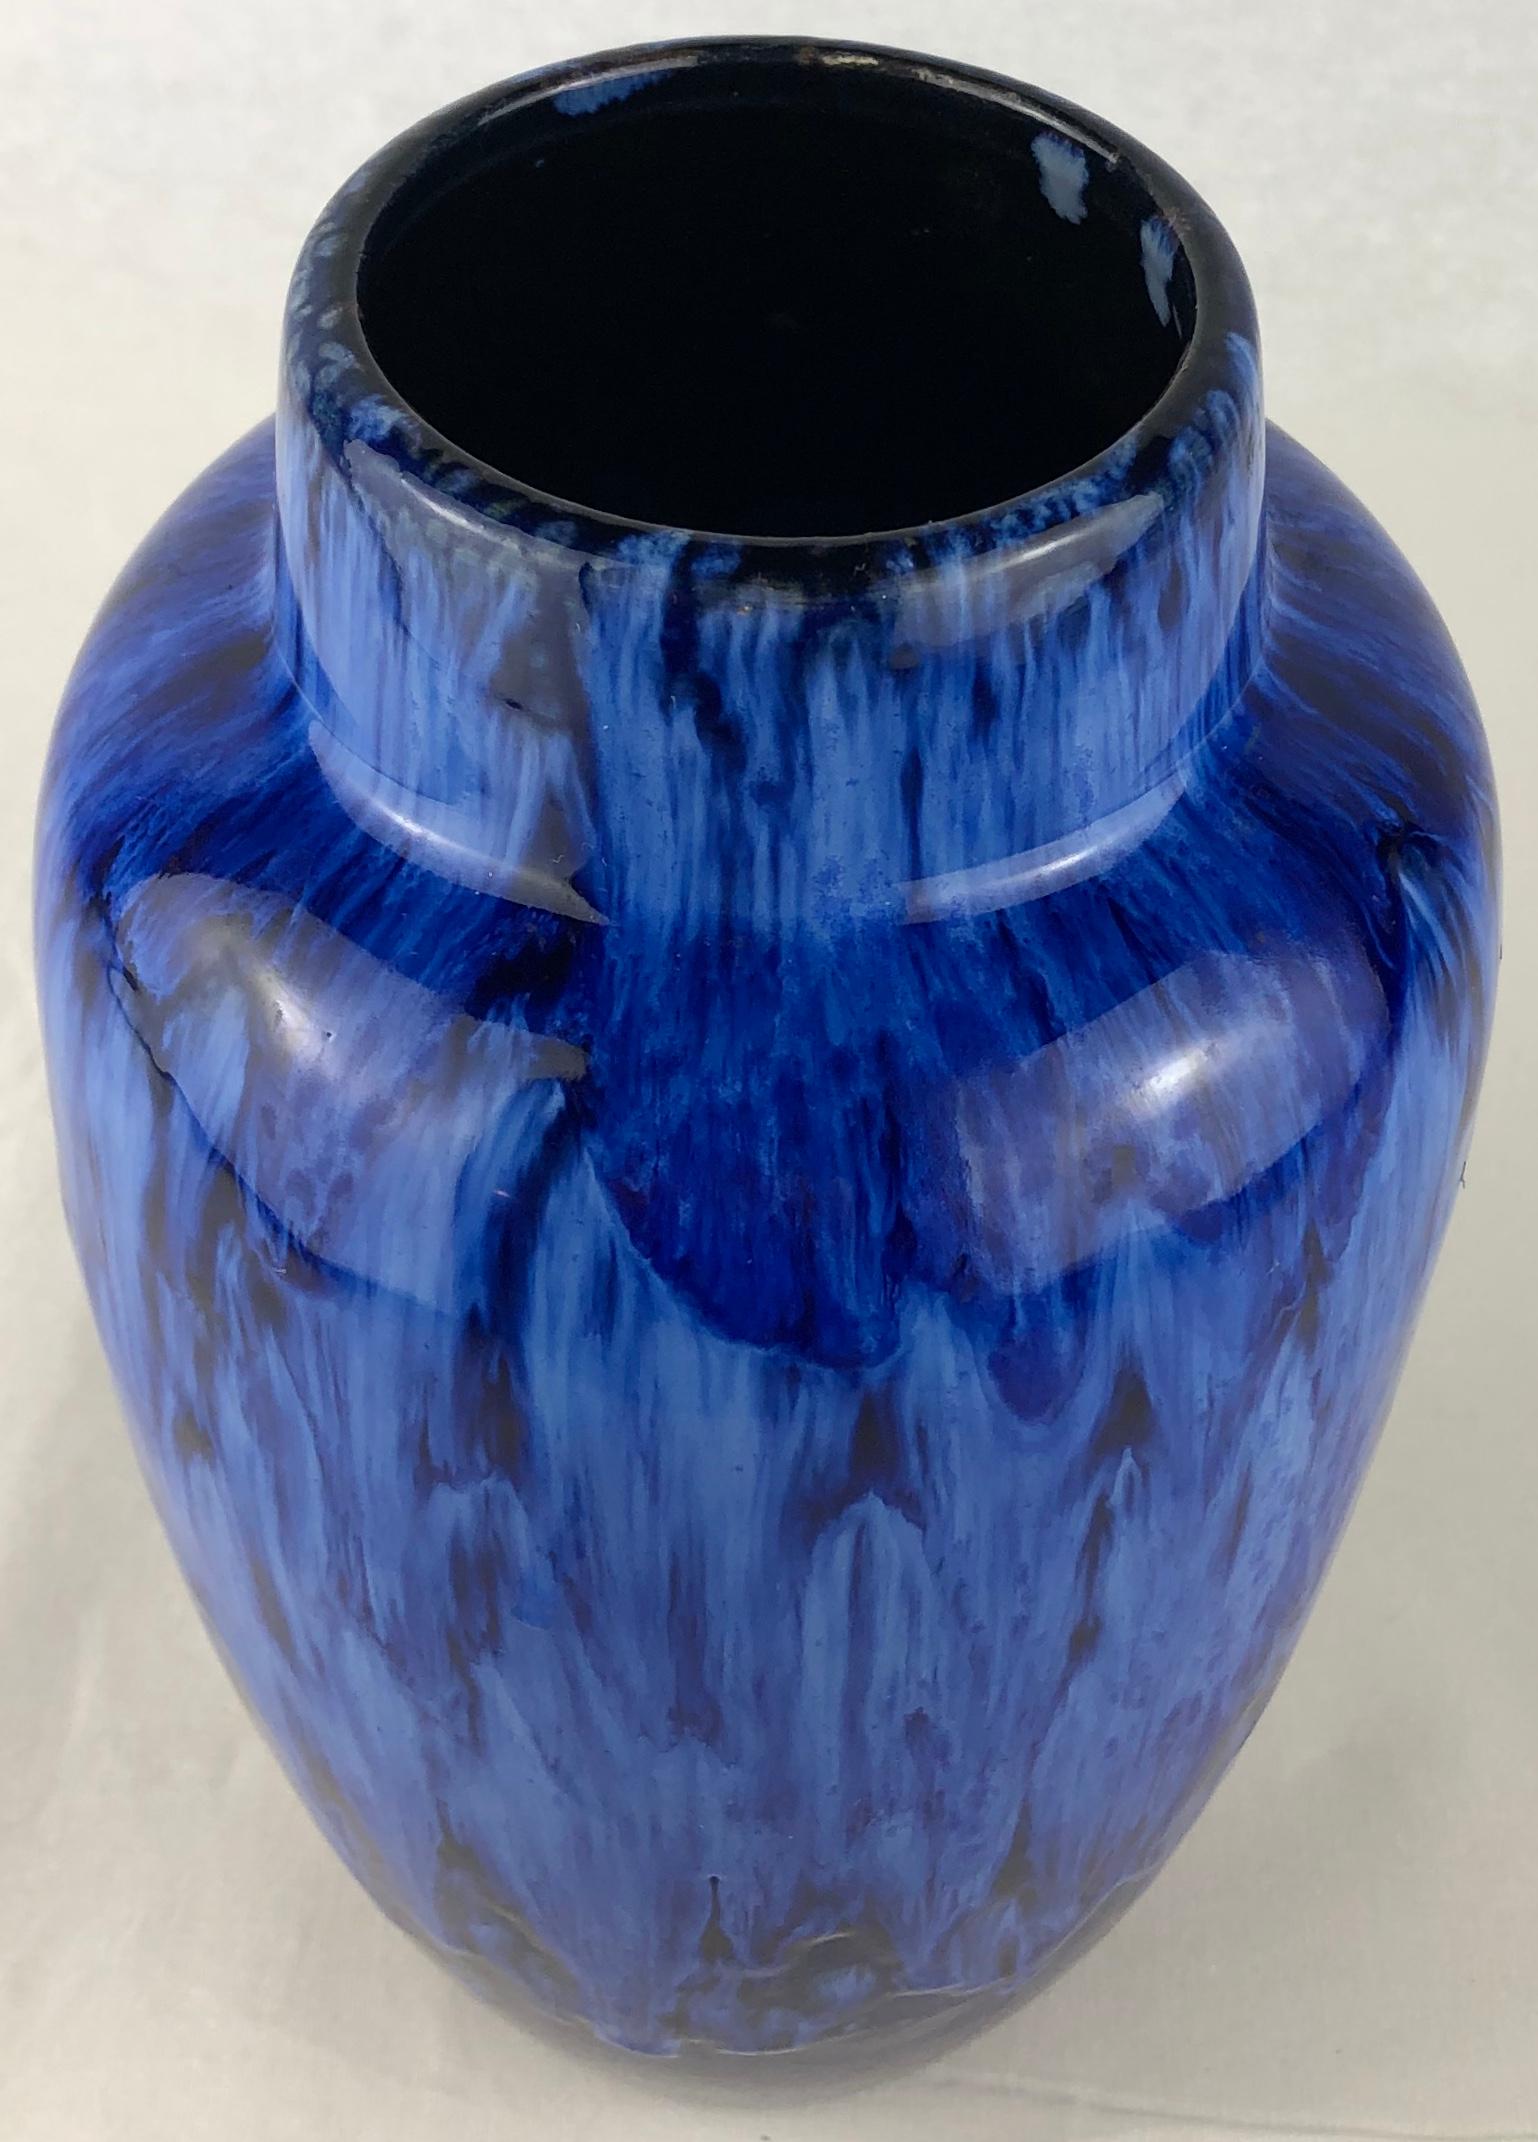 Midcentury French ceramic vase in a stunning cobalt blue color. 

This gorgeous decorative object will enhance any table, shelf or countertop. 
Perfect vintage condition, no cracks or chips.

Bears the makers mark, artist name unknown. 
Made in the